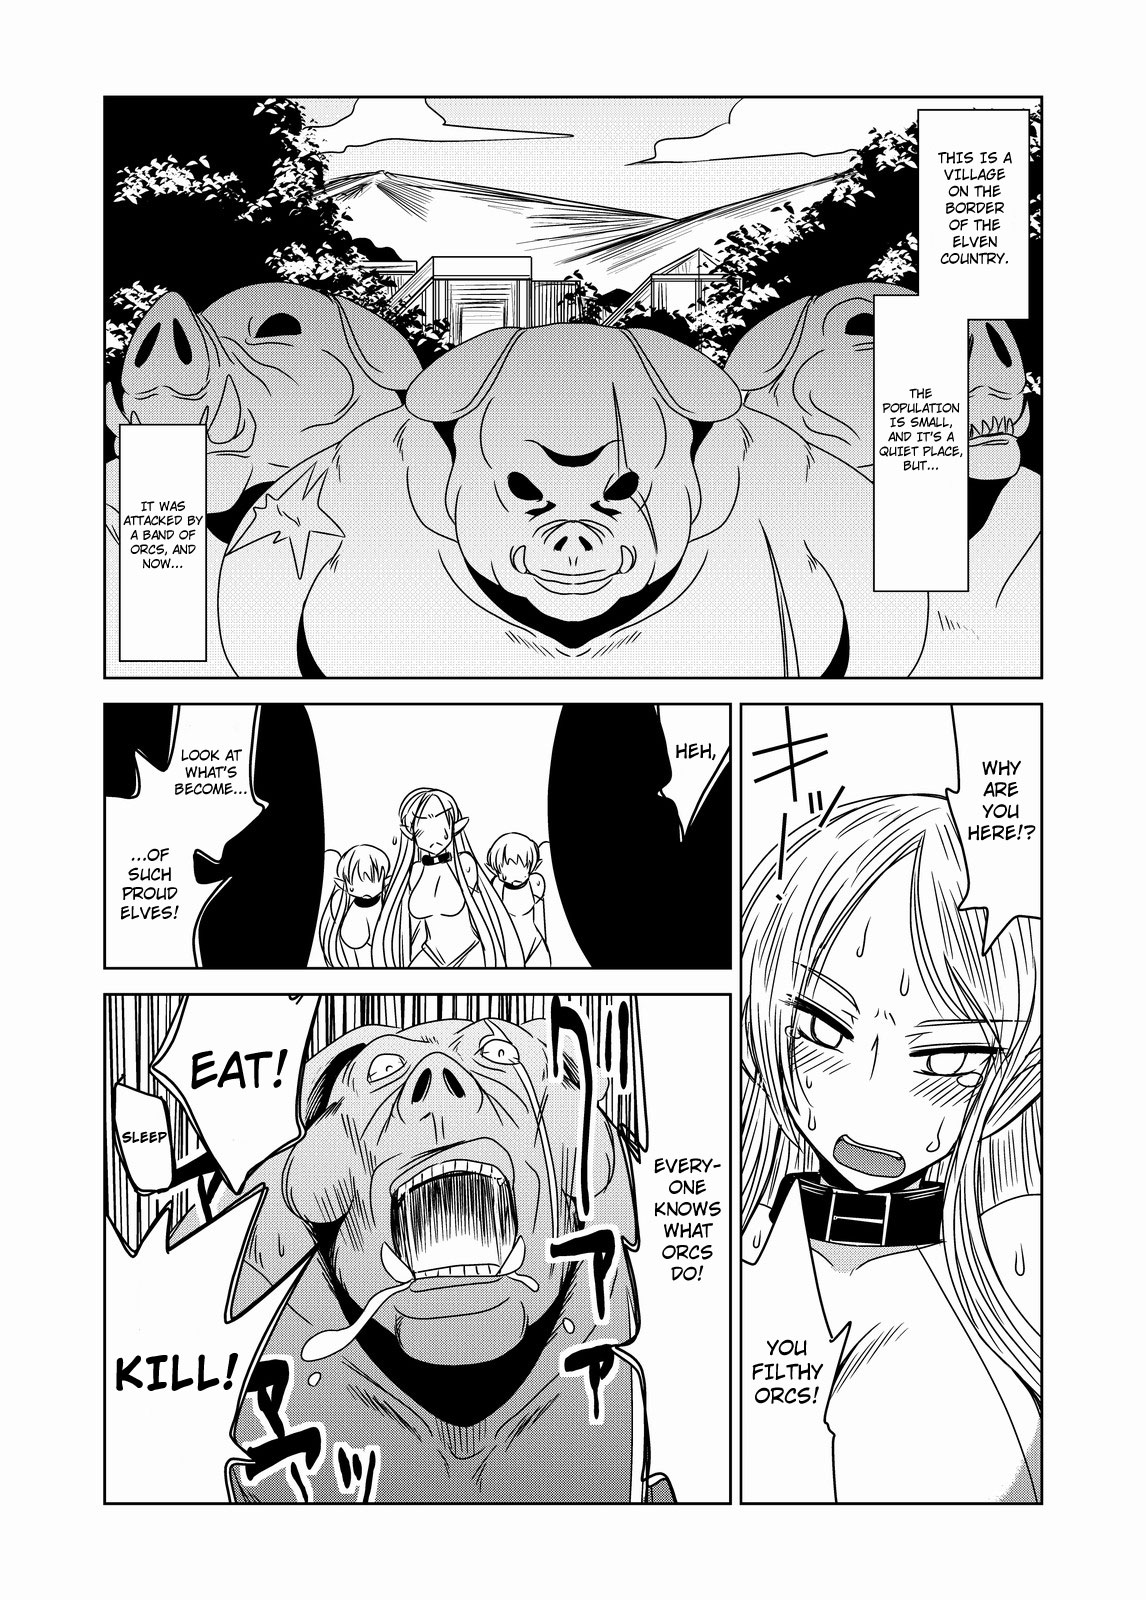 [Hroz] Orc Dakara Elf Osotta Zenin Succubus Datta wa. | We Assaulted Some Elves Because We're Orcs But It Turns Out They Were All Actually Succubi [English] [4dawgz + Thetsuuyaku] [ふろず] オークだからエルフ襲ったら全員サキュバスだったわ。 [英訳]